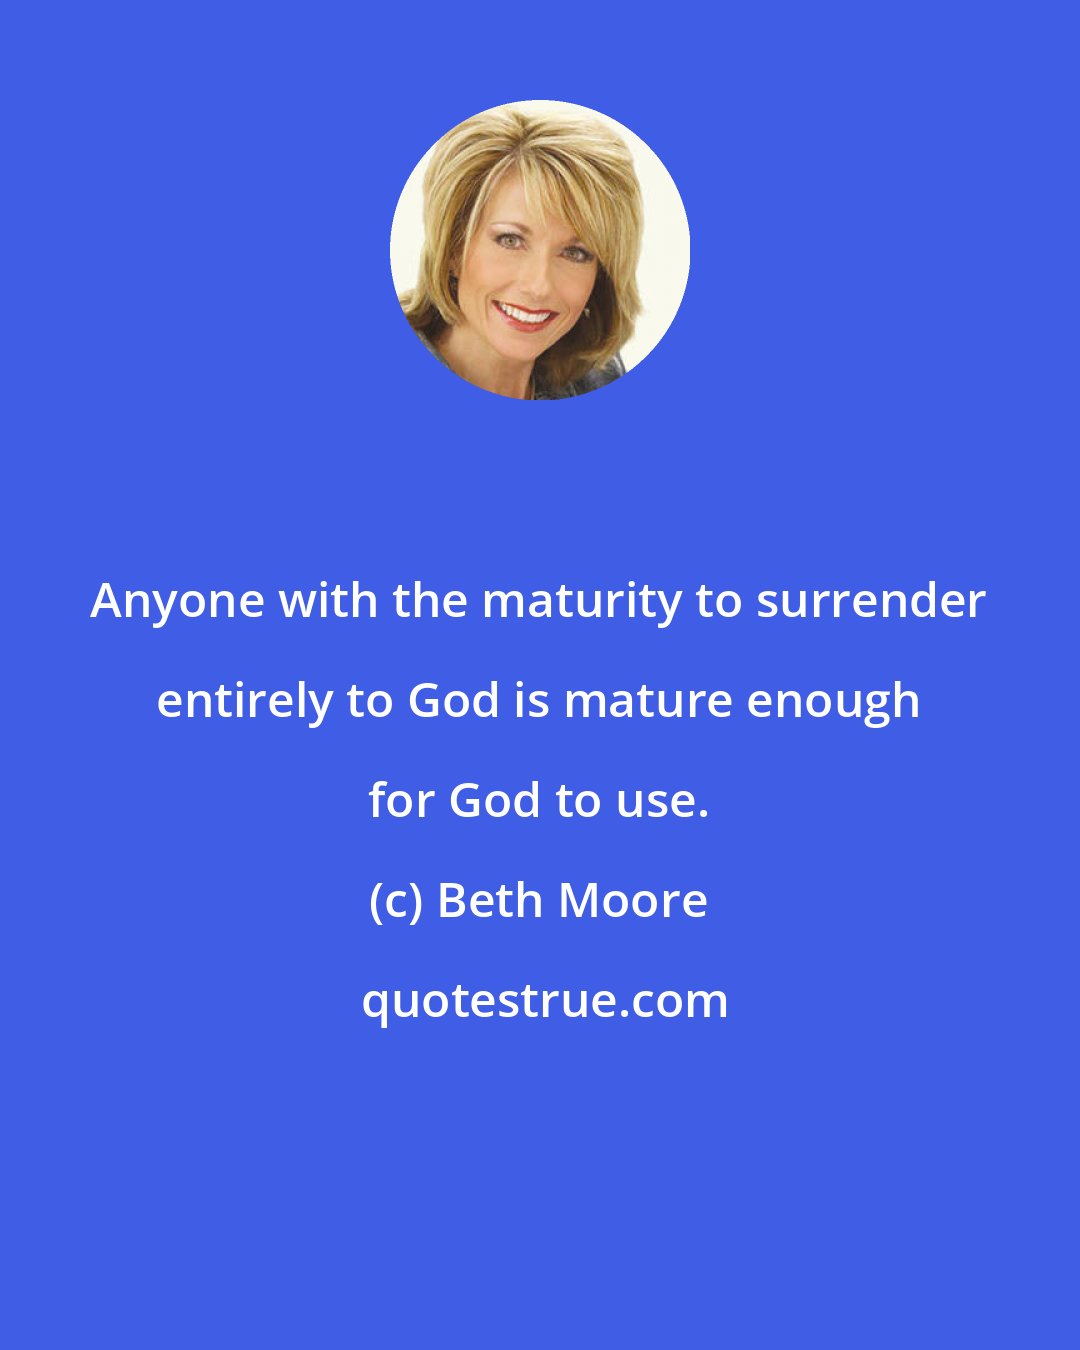 Beth Moore: Anyone with the maturity to surrender entirely to God is mature enough for God to use.